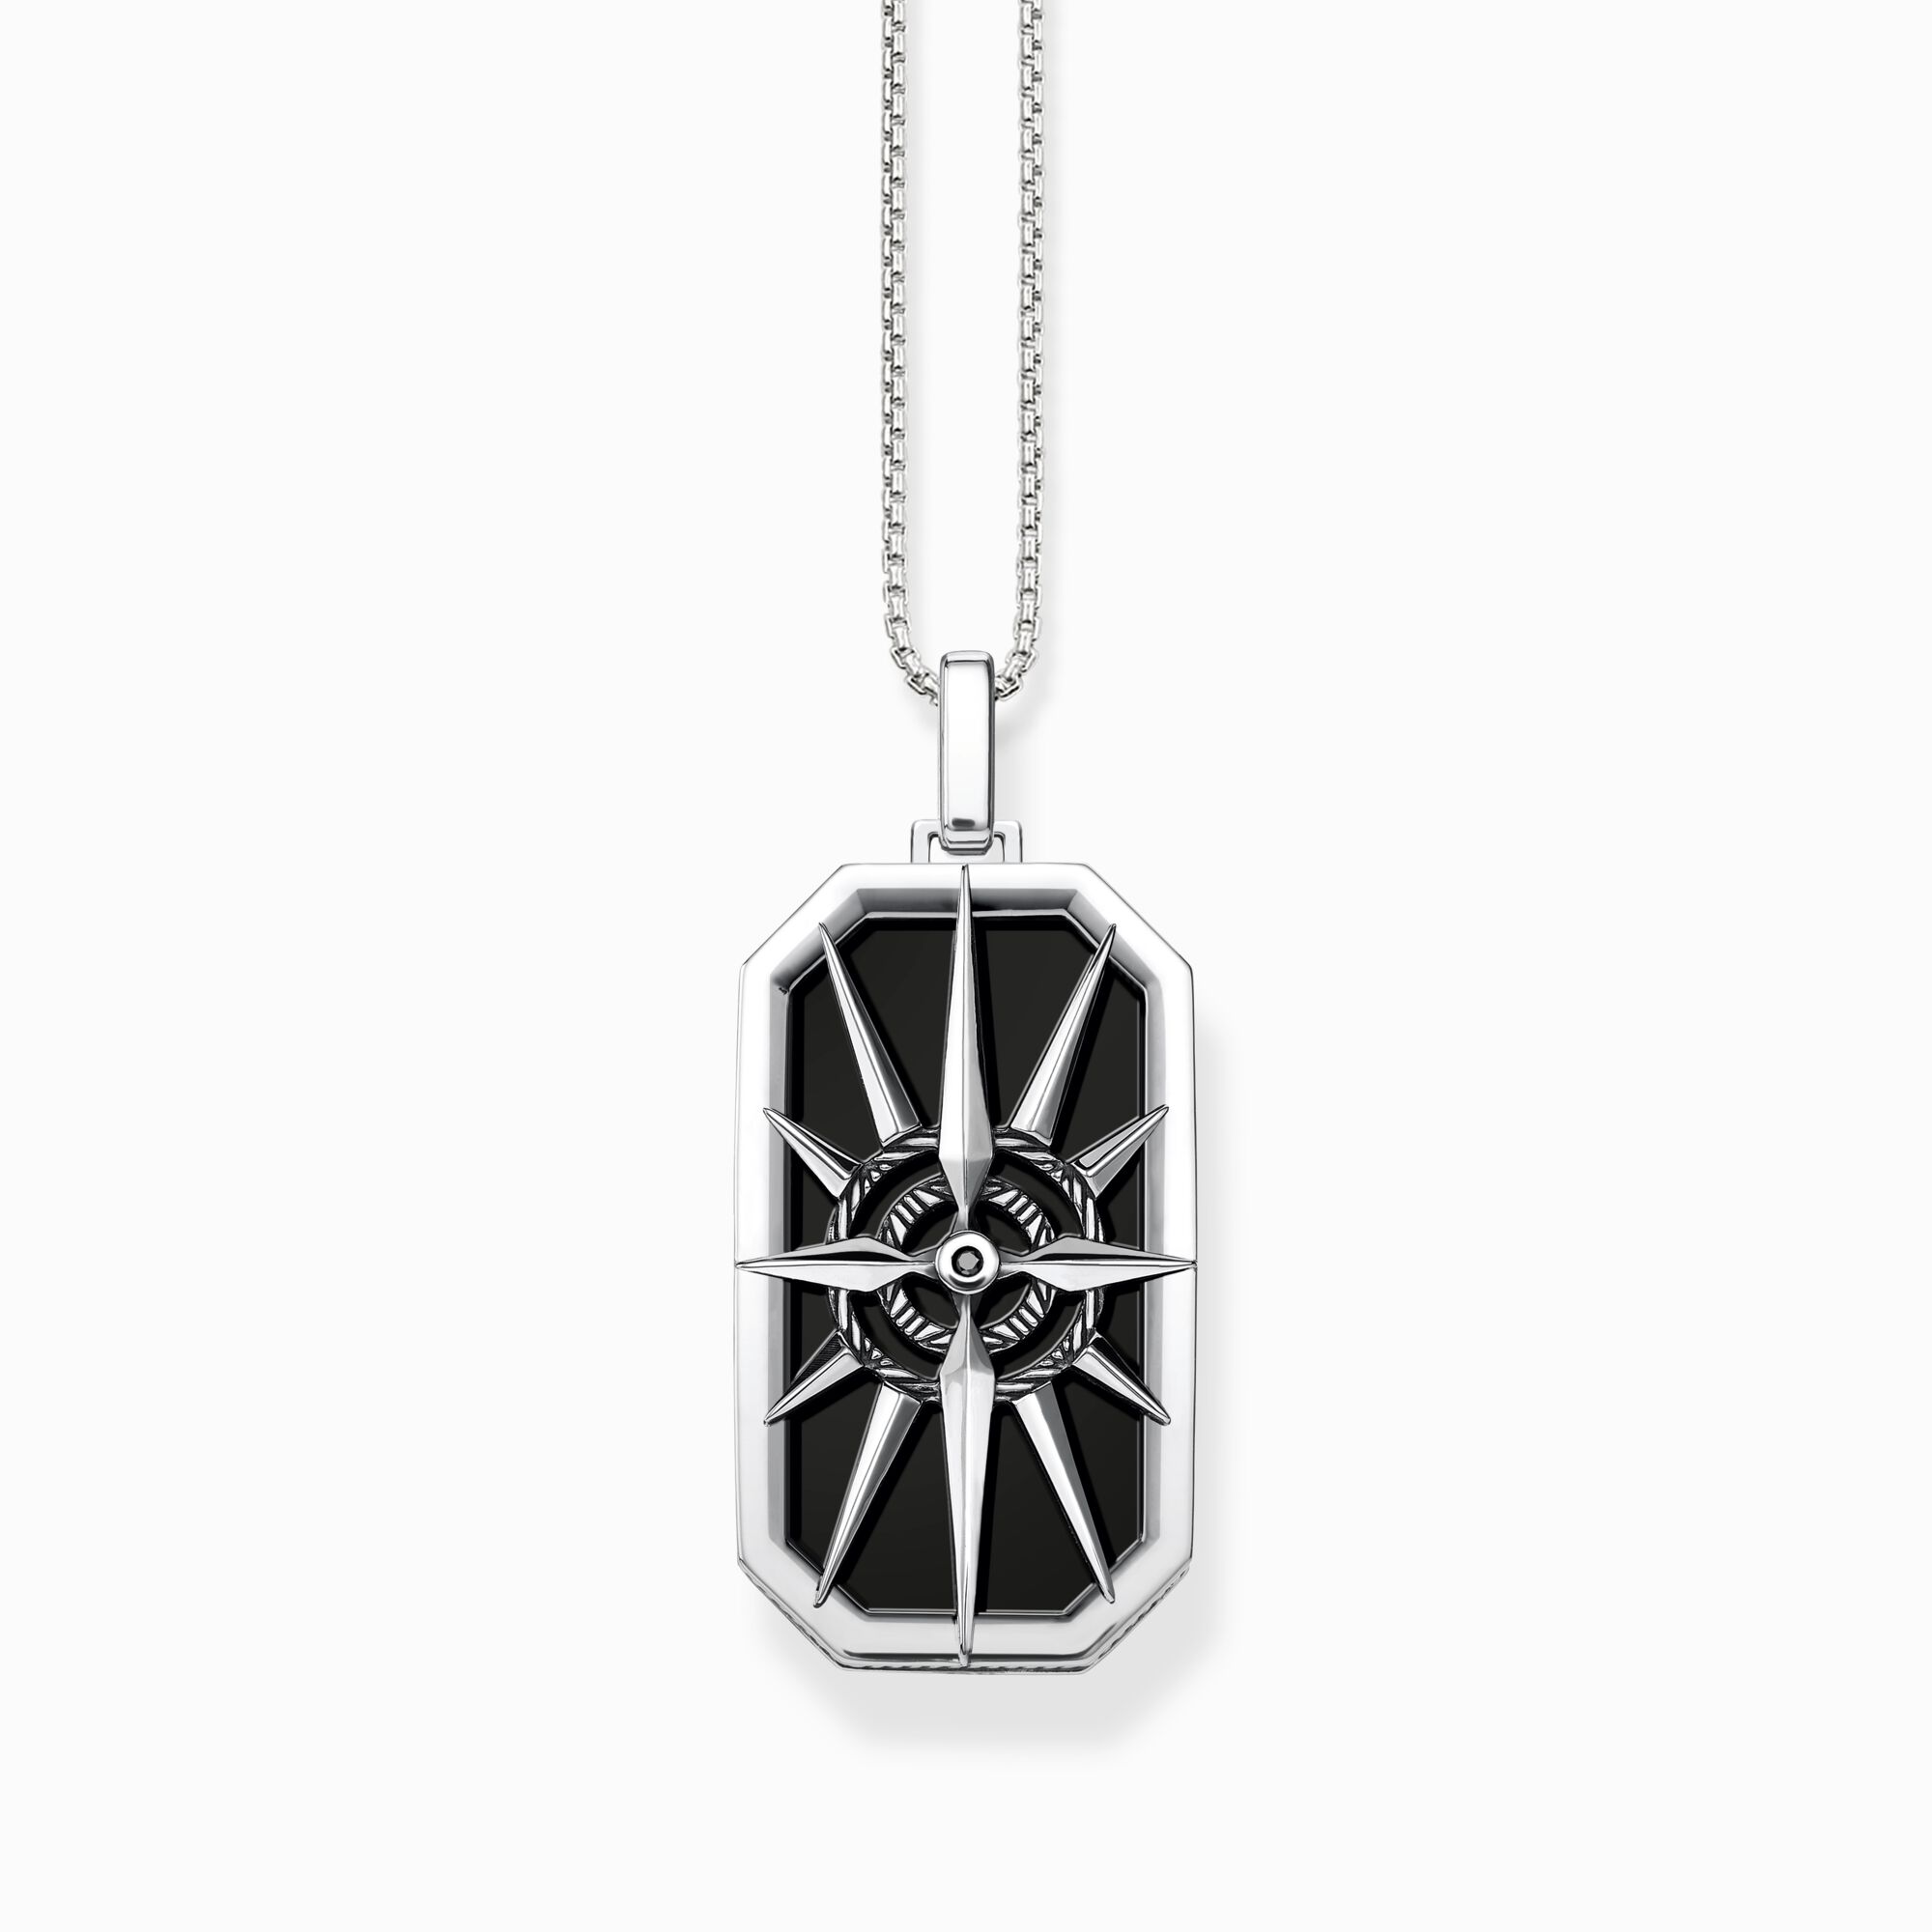 Jewellery set necklace compass black and silver blackened from the  collection in the THOMAS SABO online store